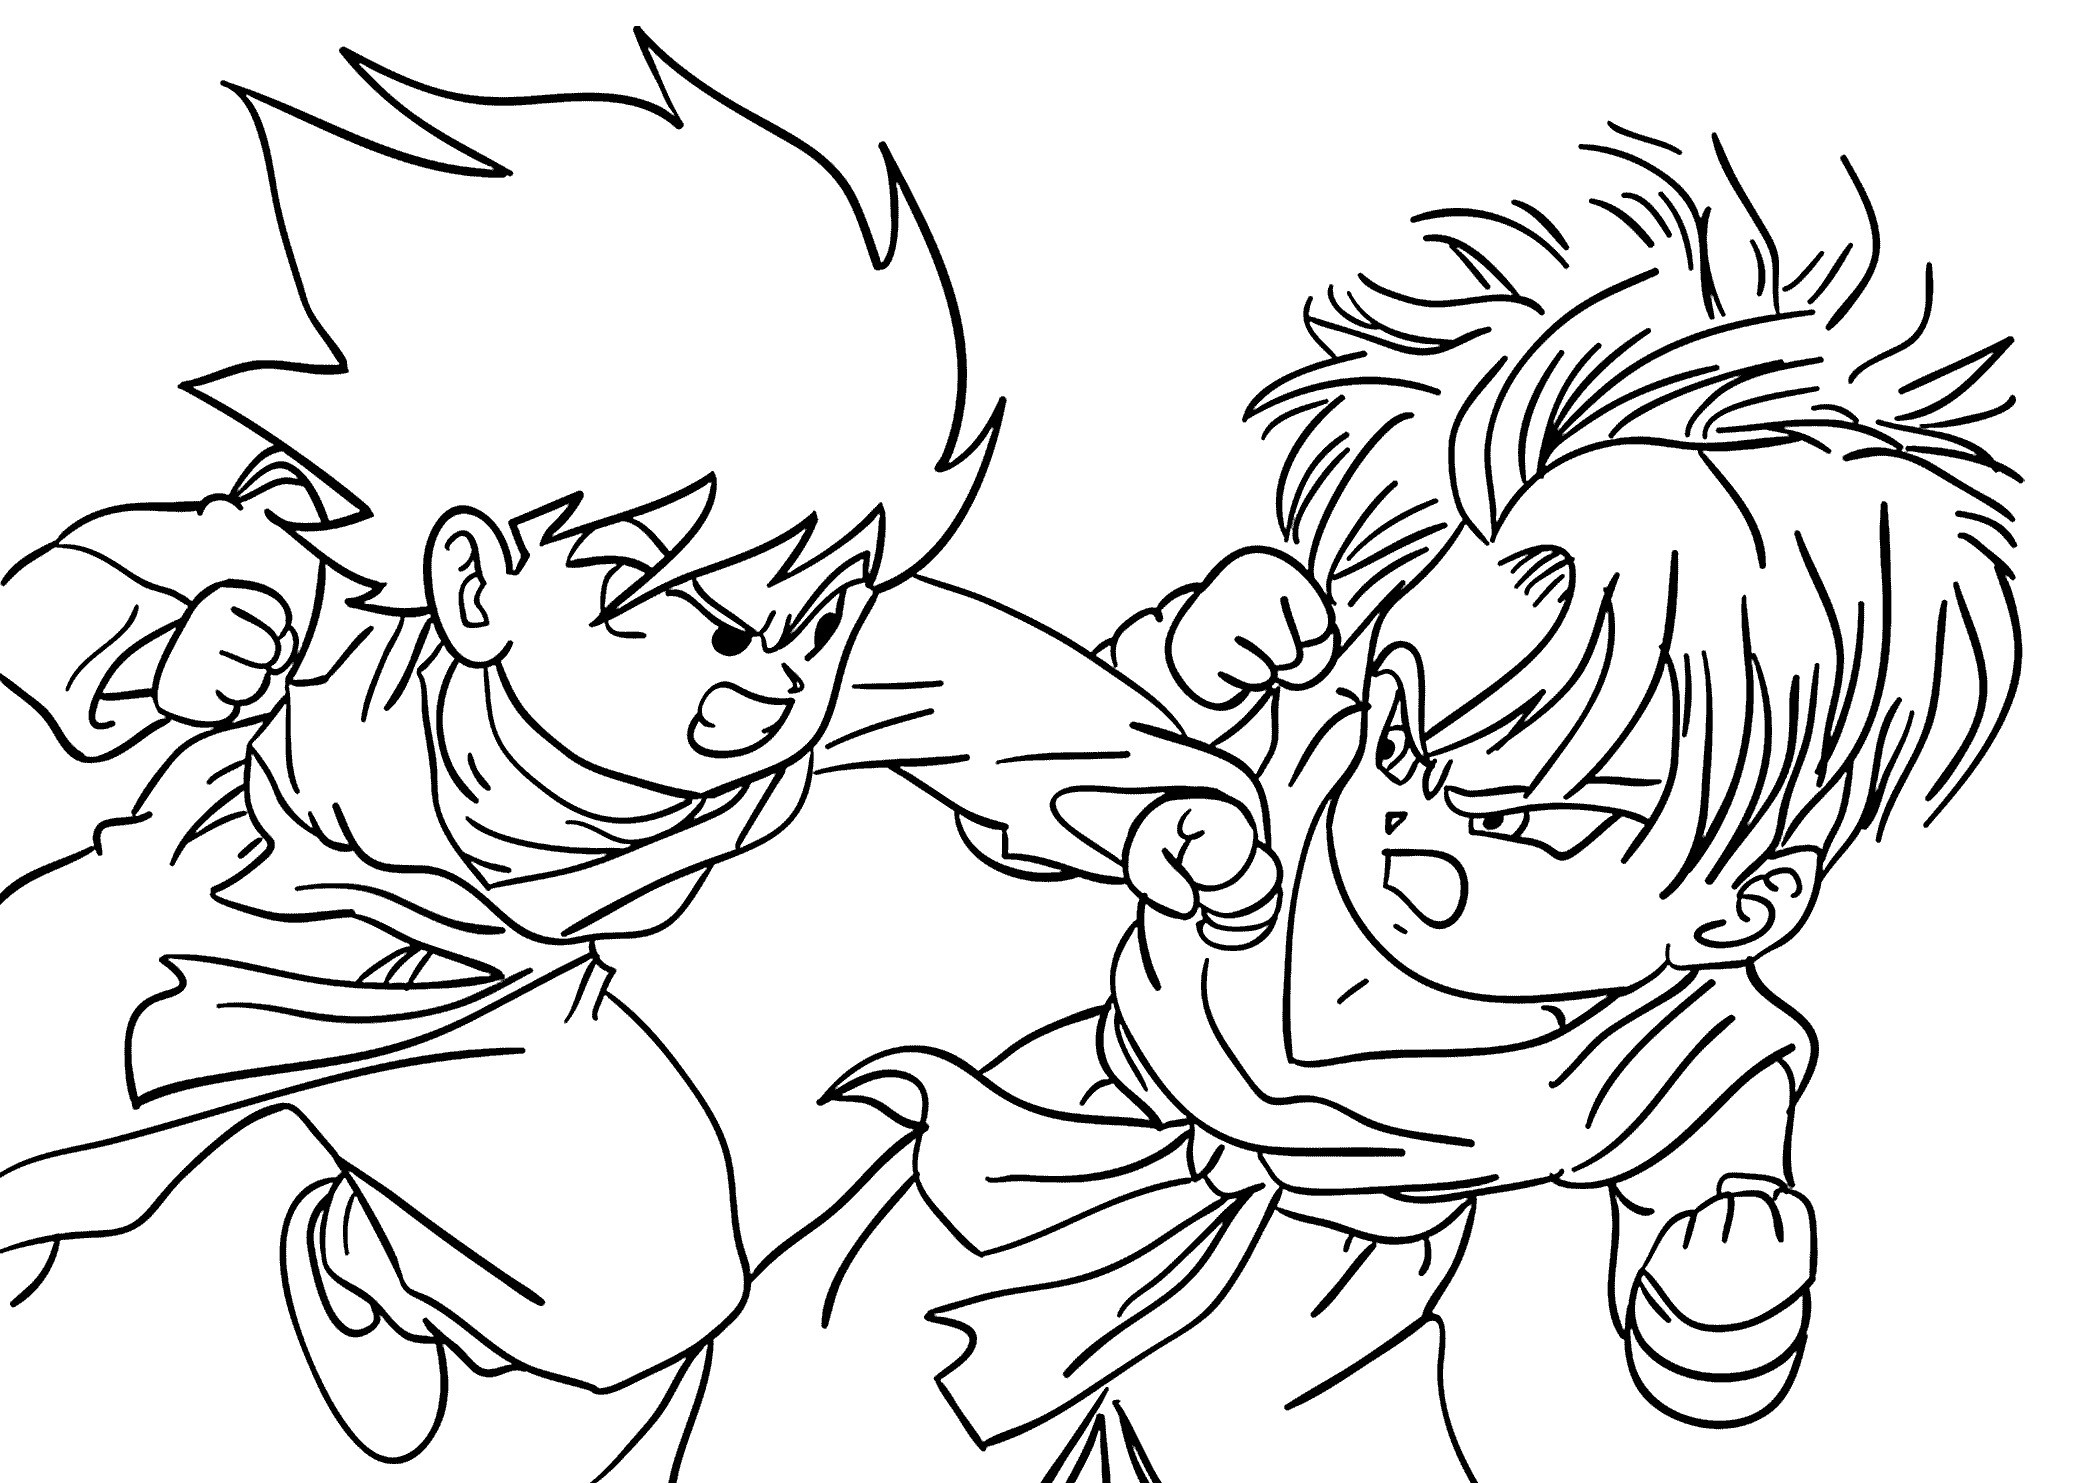 Dragon Ball Z Black and White Coloring Pages